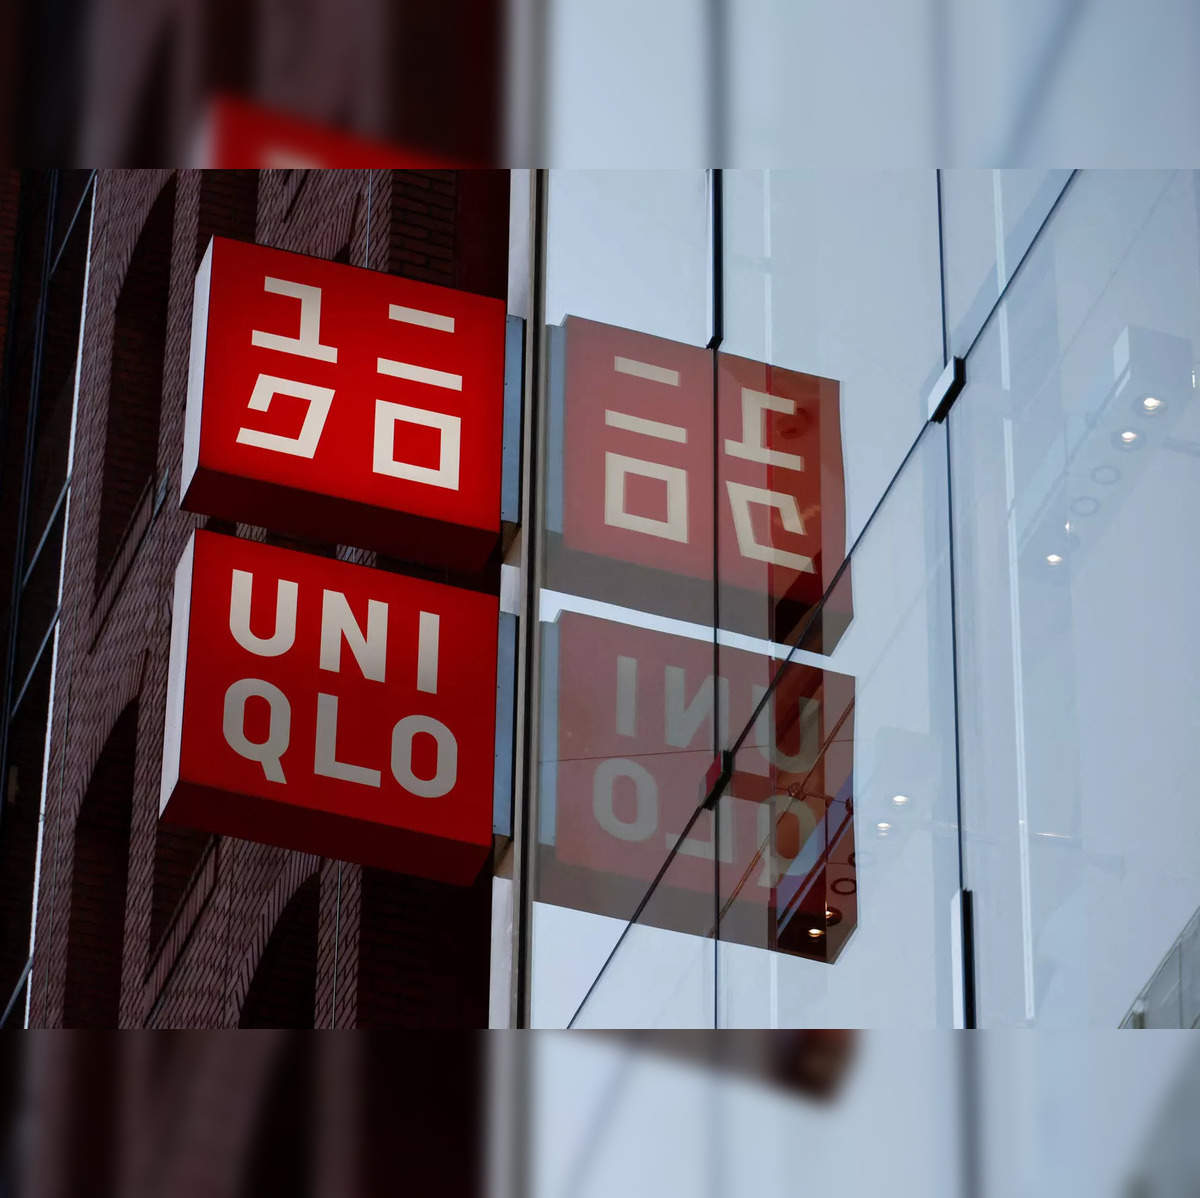 Japan's Uniqlo sues China rival Shein over viral bag copies - The